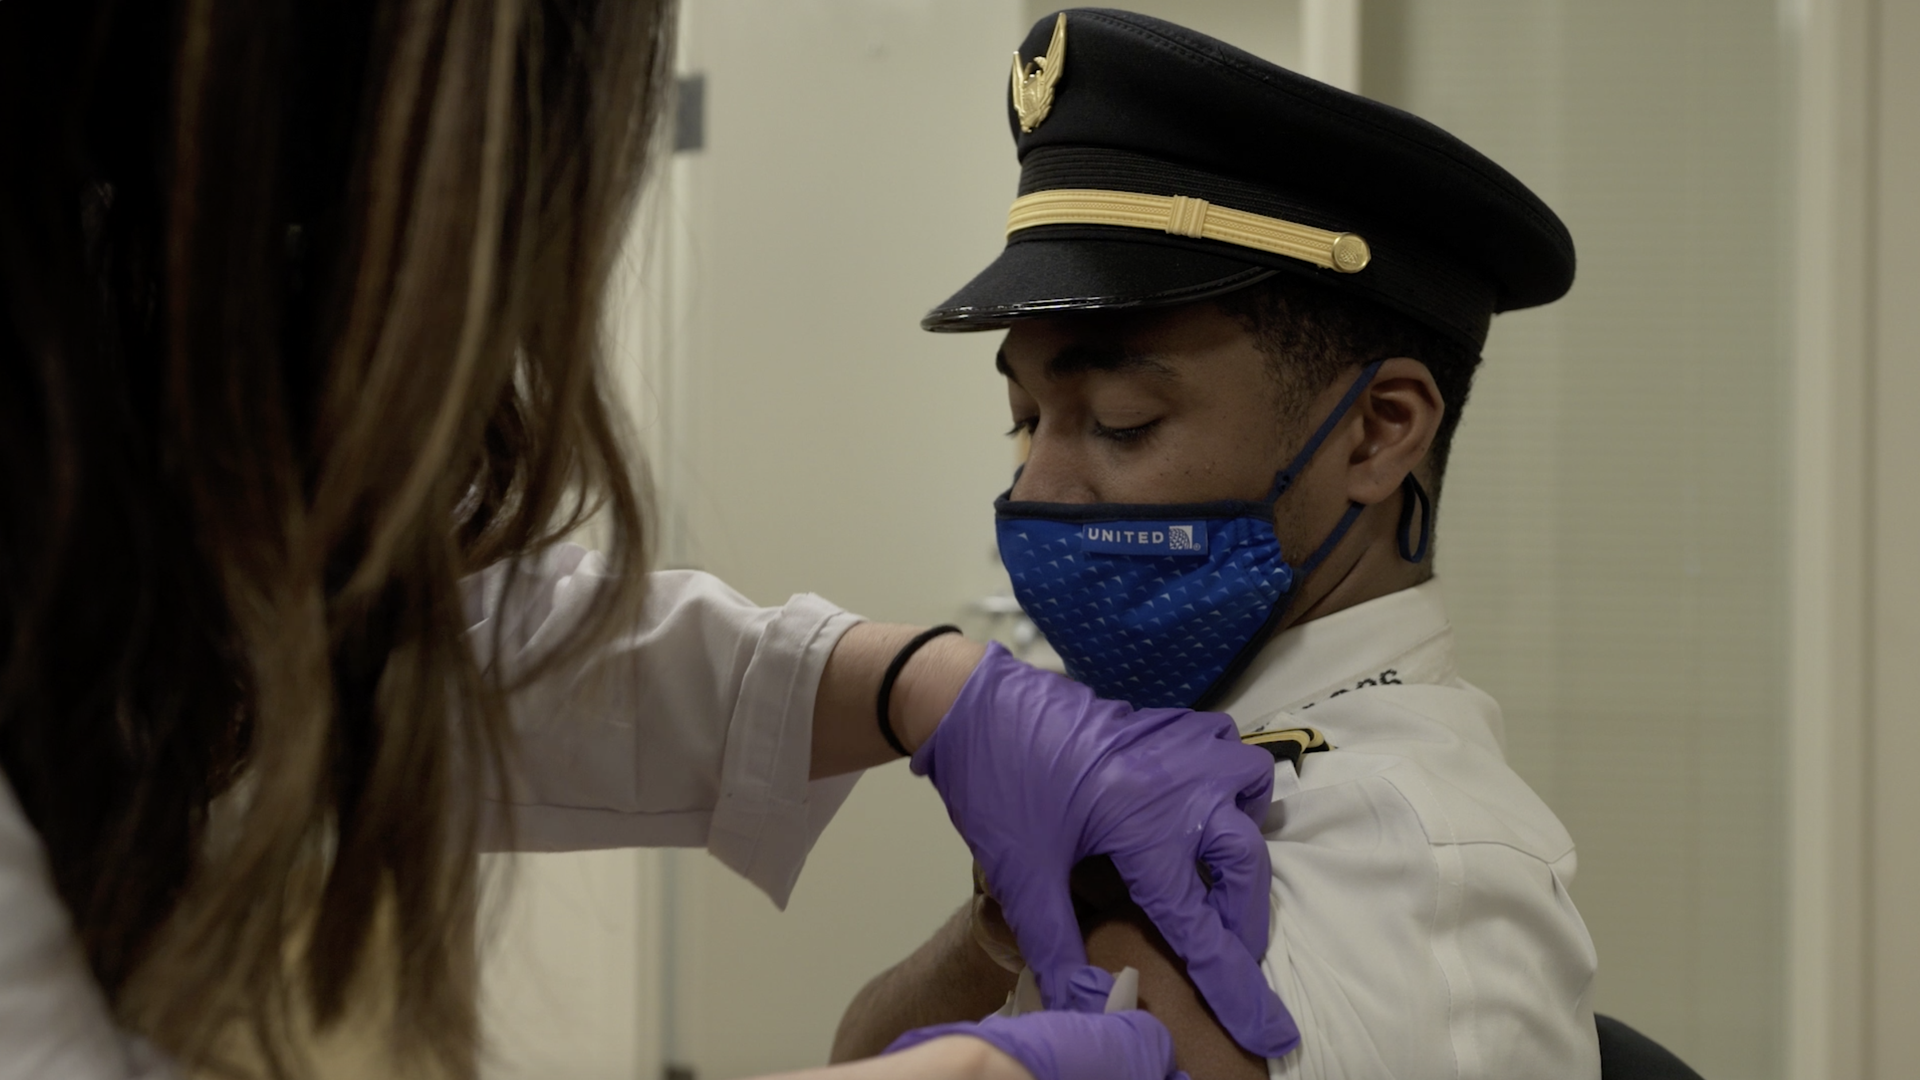 Image of a United Airlines pilot being vaccinated